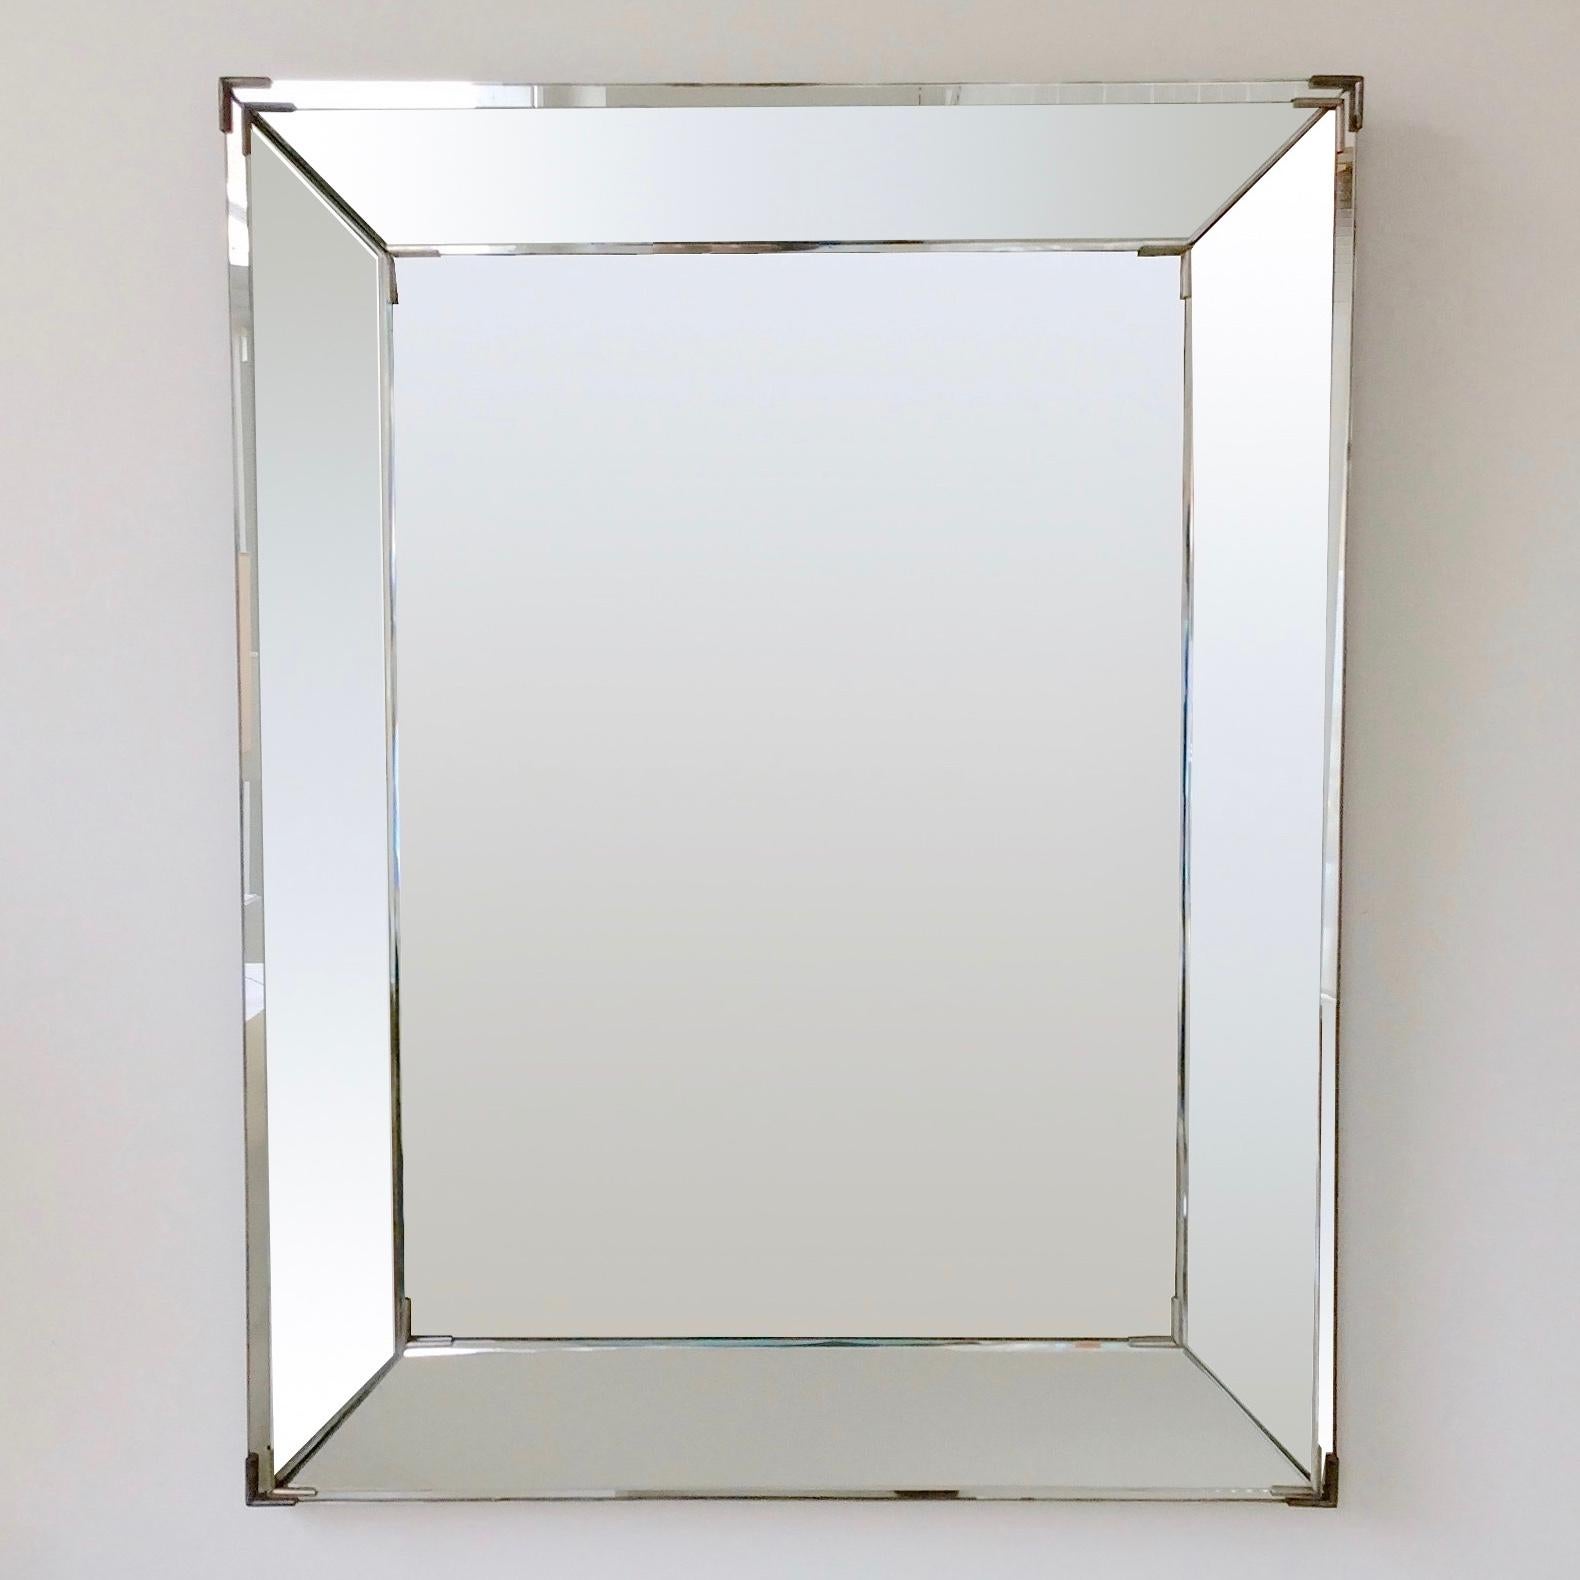 Nice large Jacques Adnet wall mirror, circa 1940, France.
Parcloses mirror, nickeled metal, wood.
Dimensions: 91 cm H, 71 cm W, 7 cm D.
Good original condition.
All purchases are covered by our Buyer Protection Guarantee.
This item can be